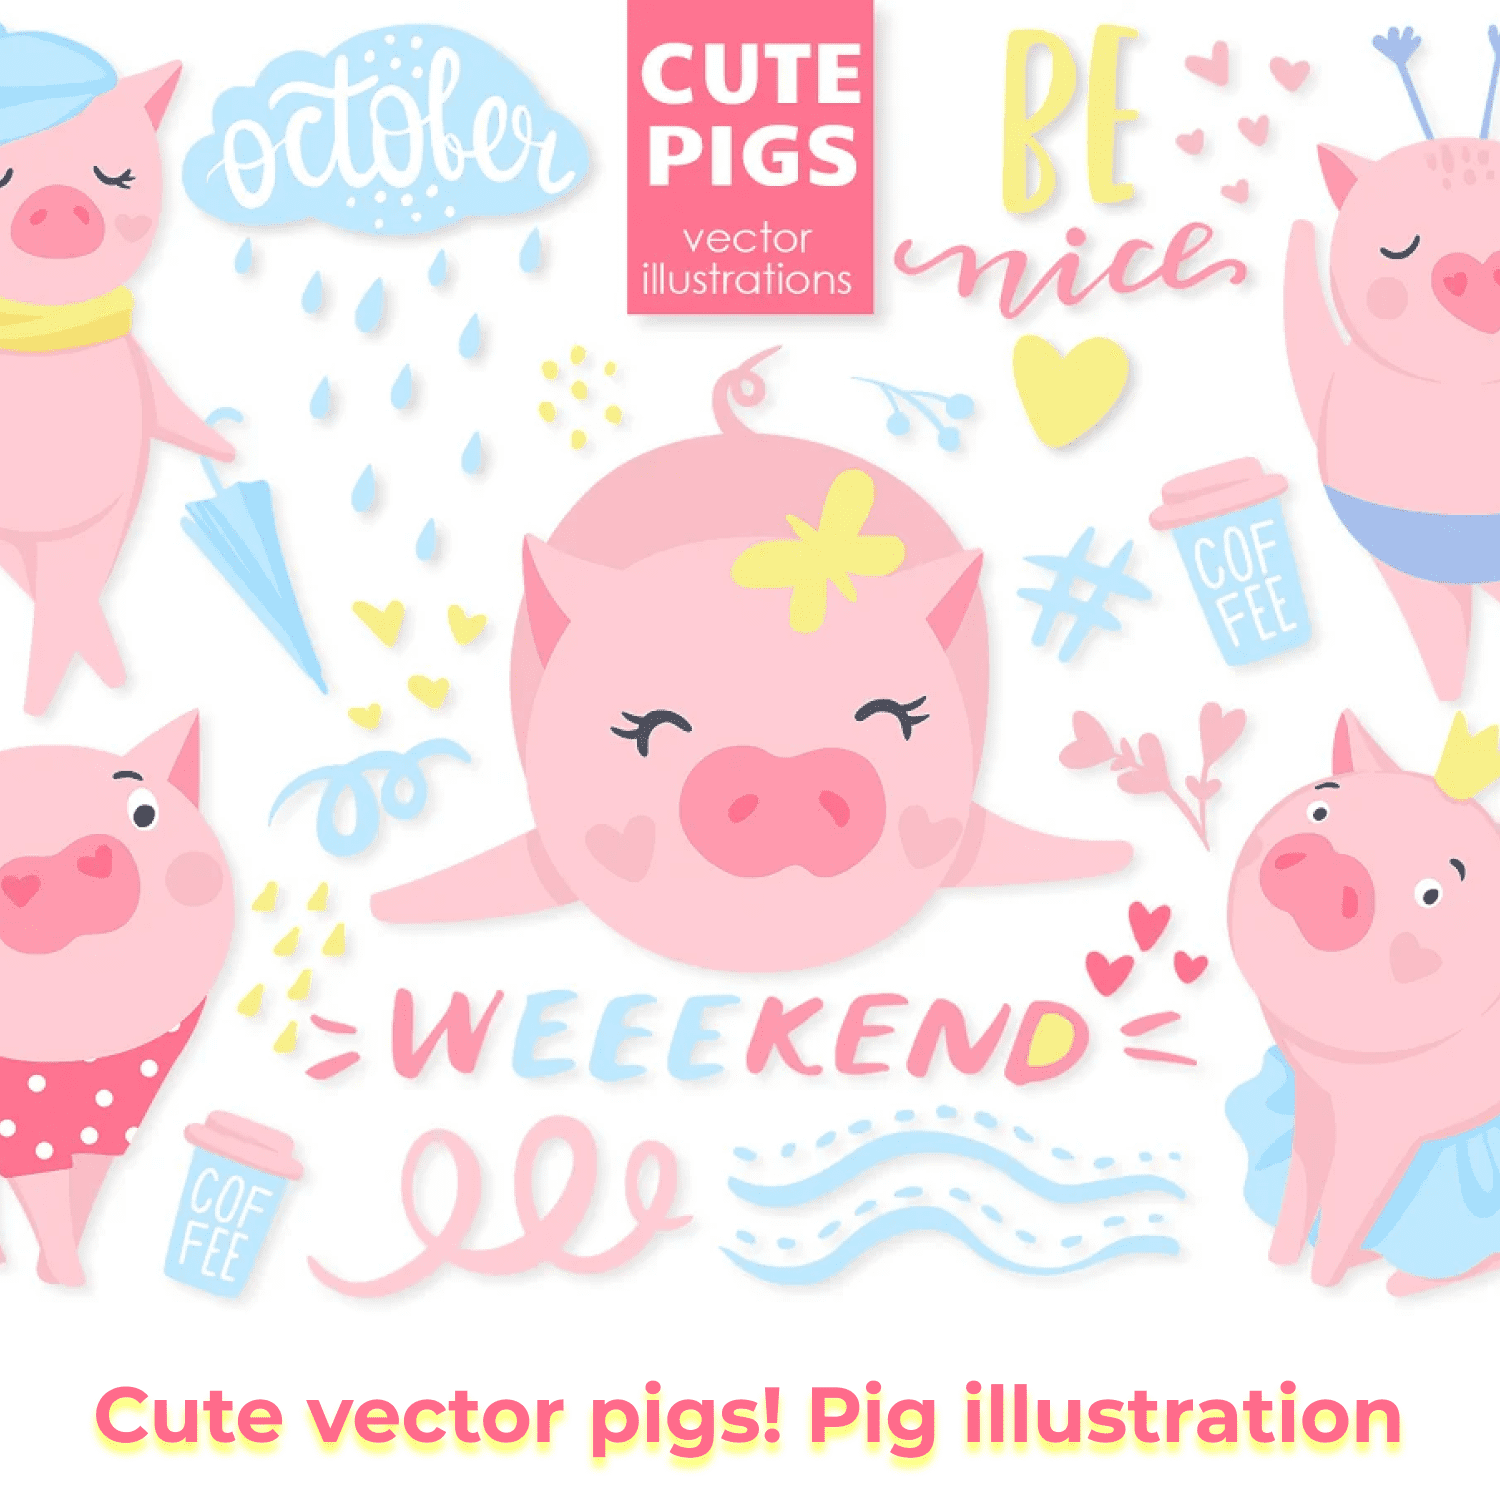 Cute vector pigs! Pig illustration. cover.